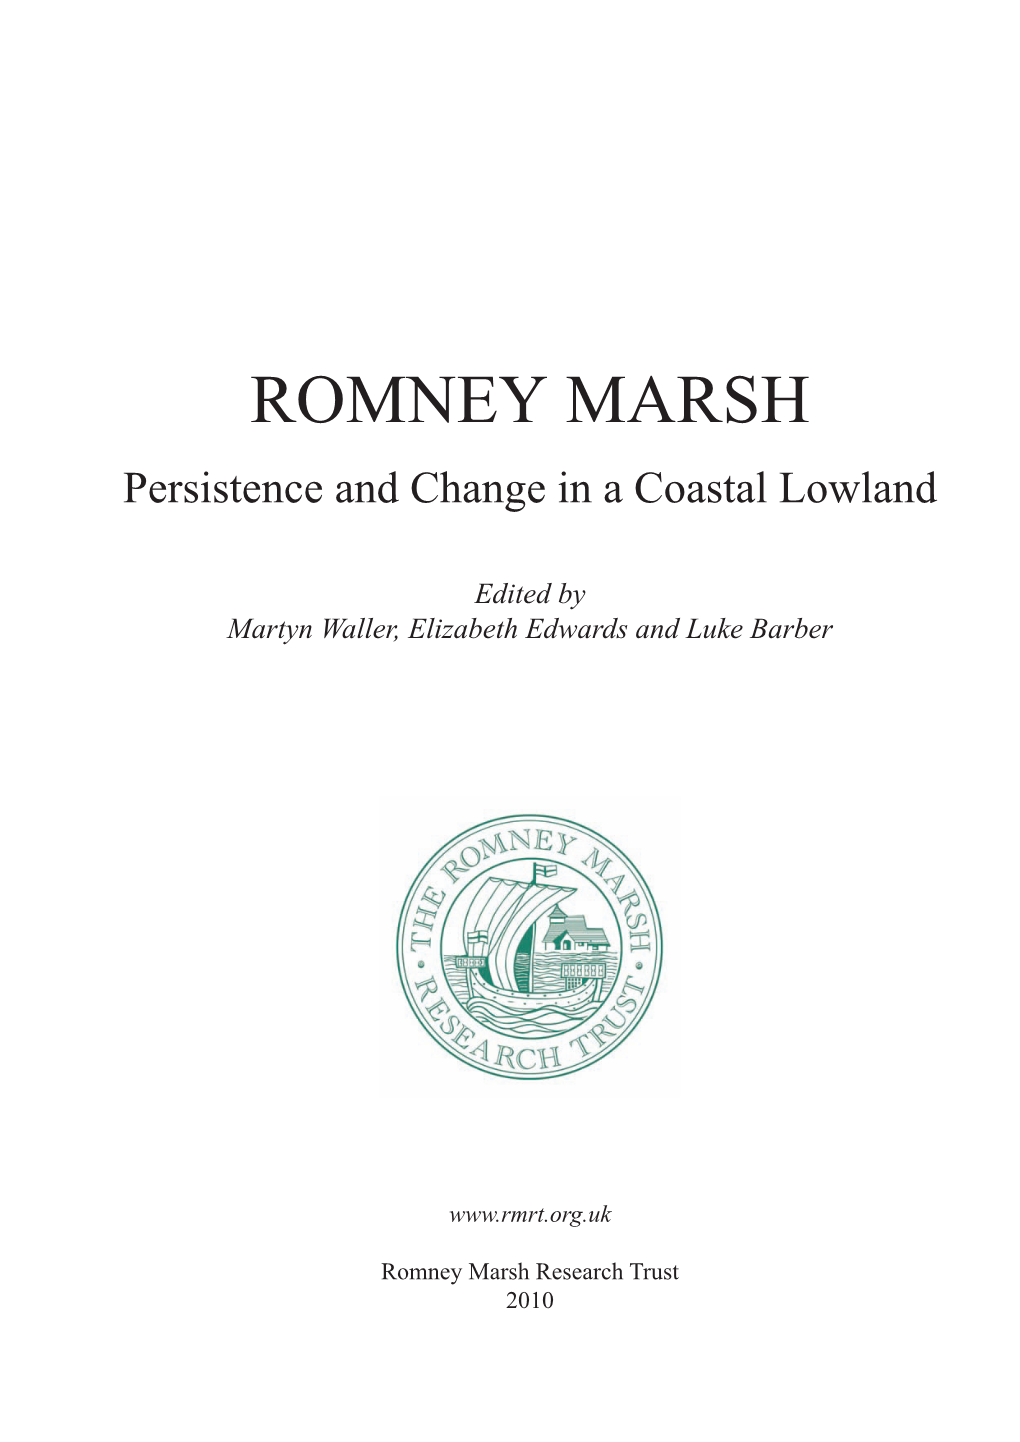 ROMNEY MARSH Persistence and Change in a Coastal Lowland